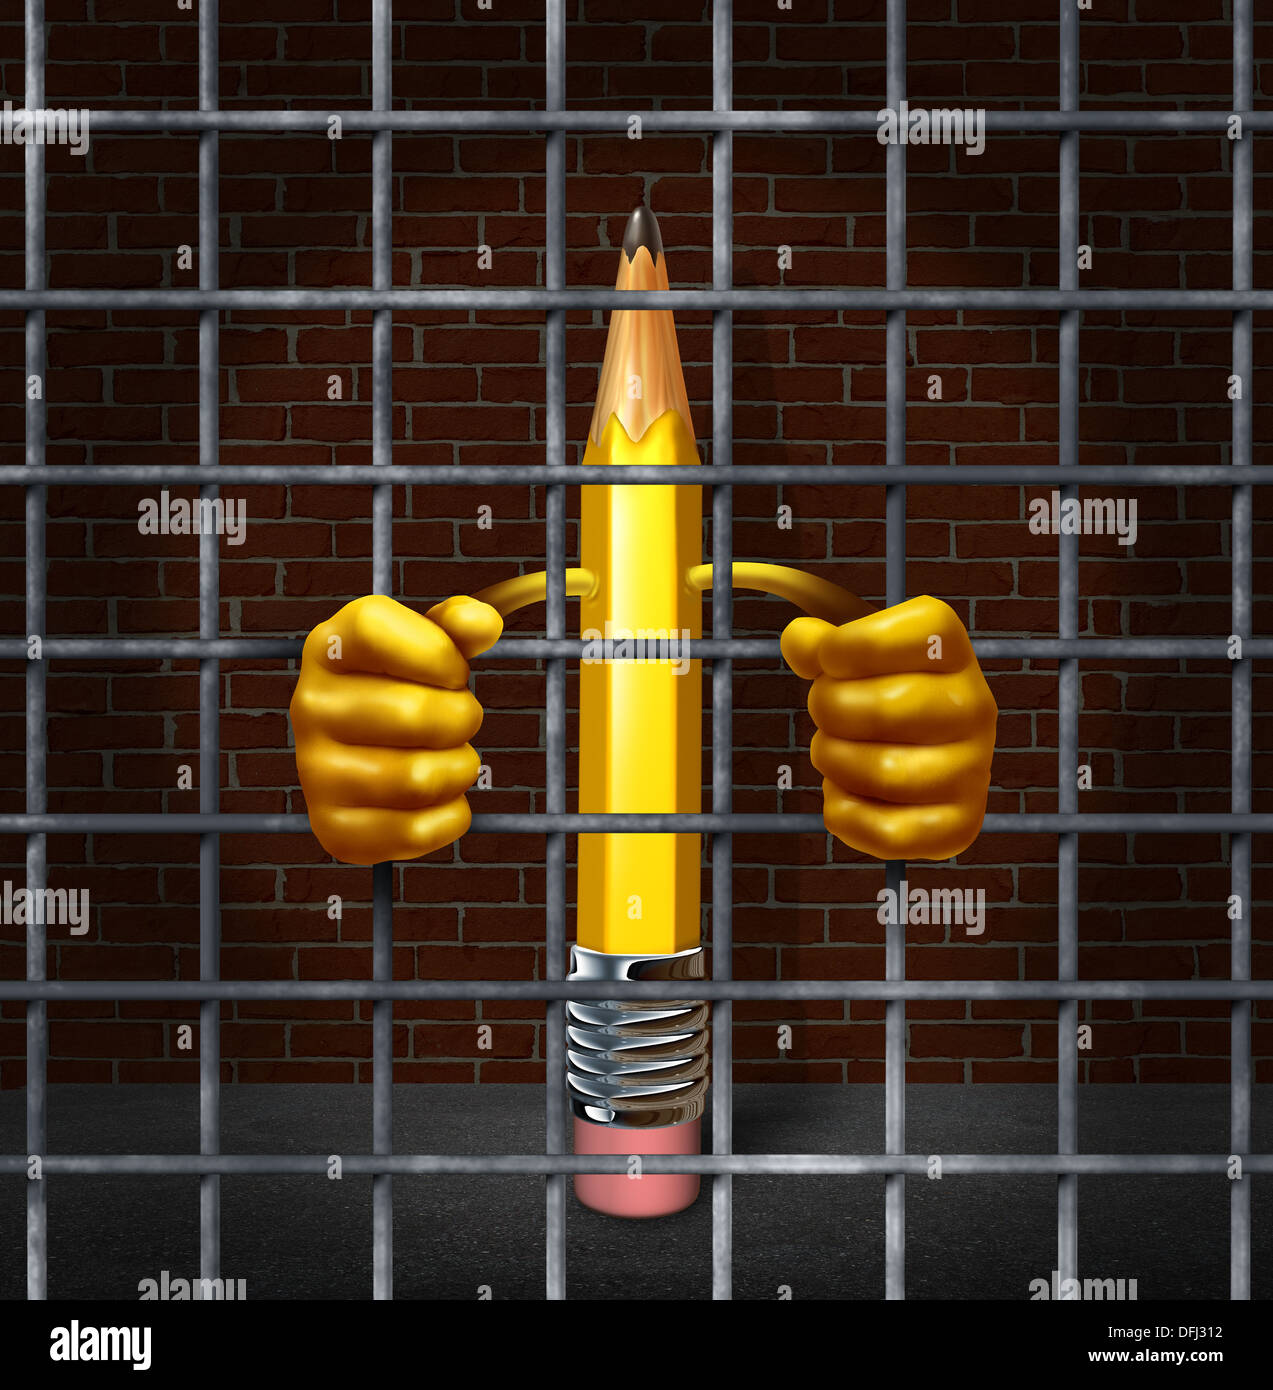 creative-block-creativity-concept-with-a-pencil-character-in-a-prison-DFJ312.jpg